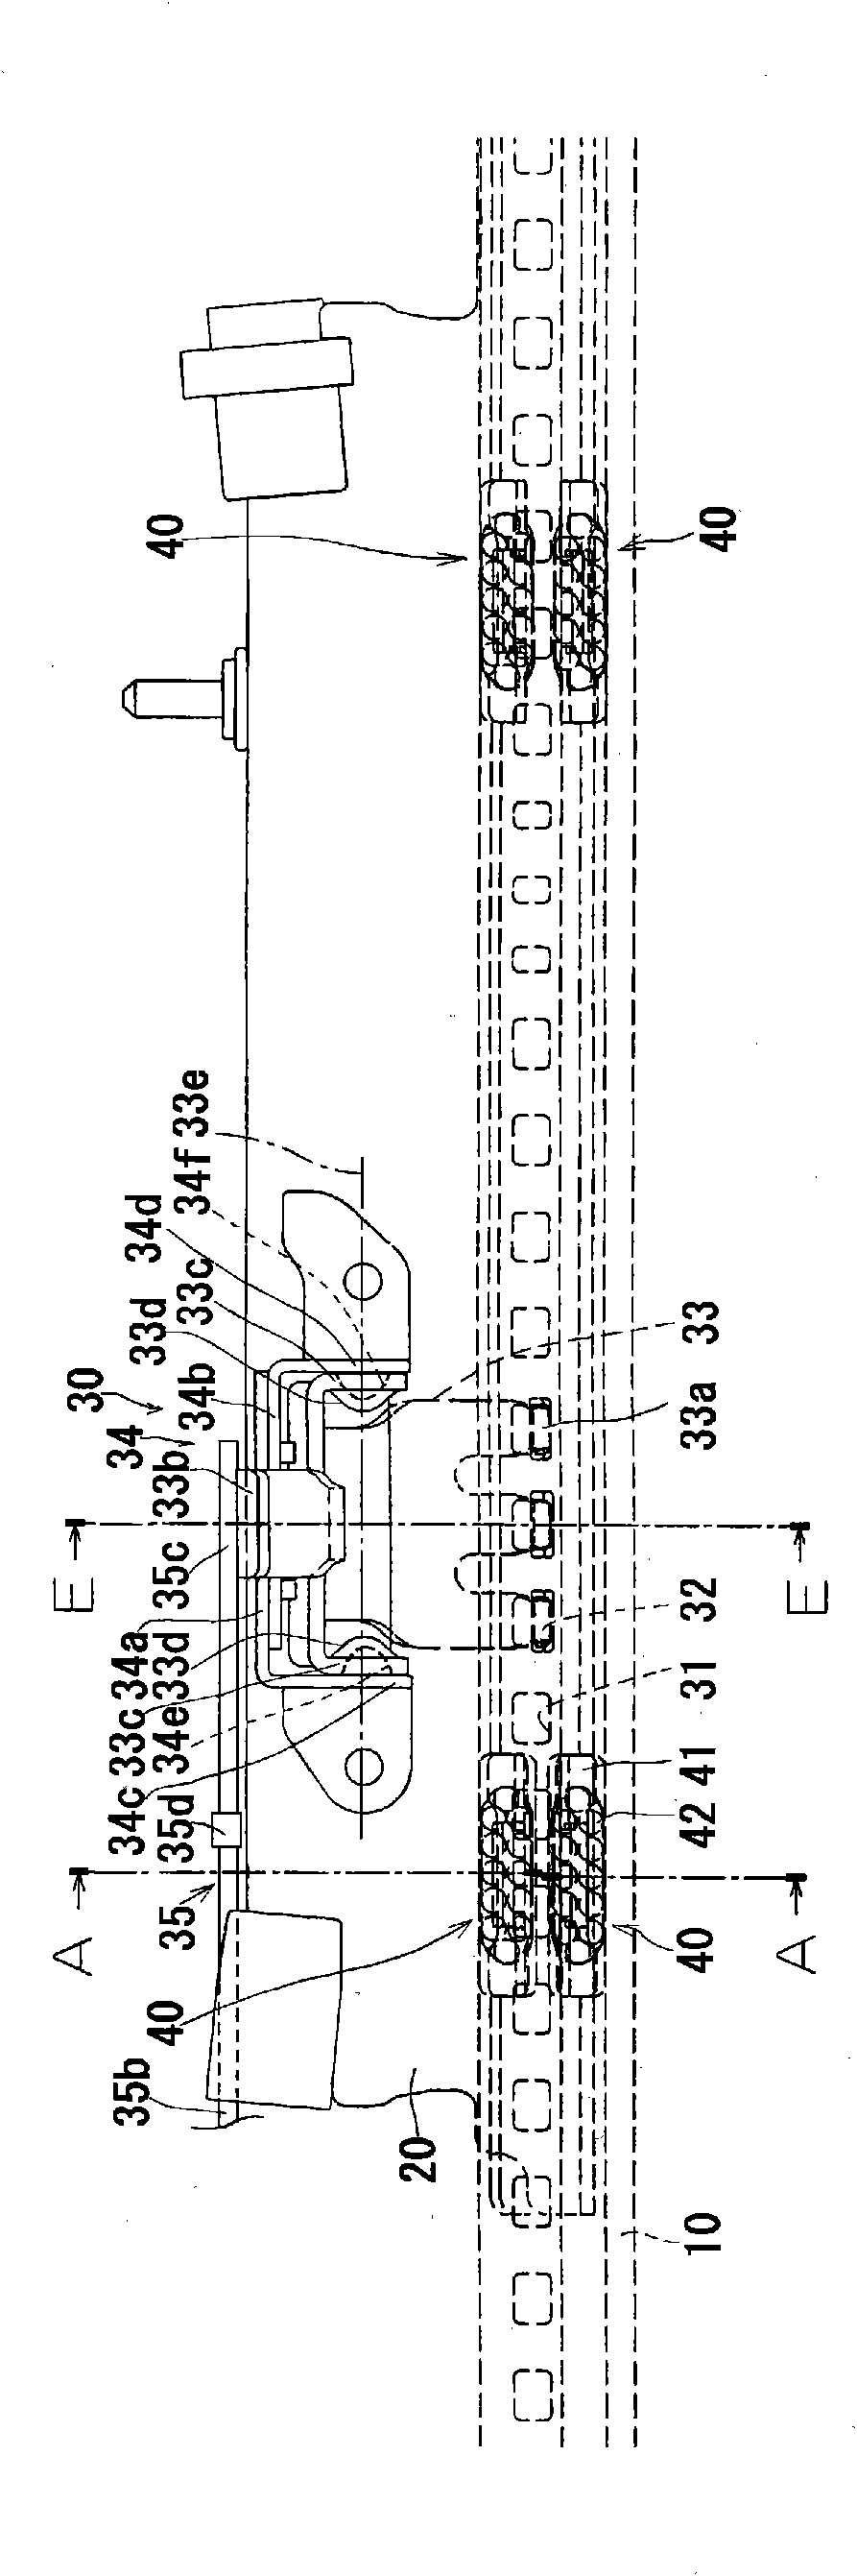 Slide device for vehicle